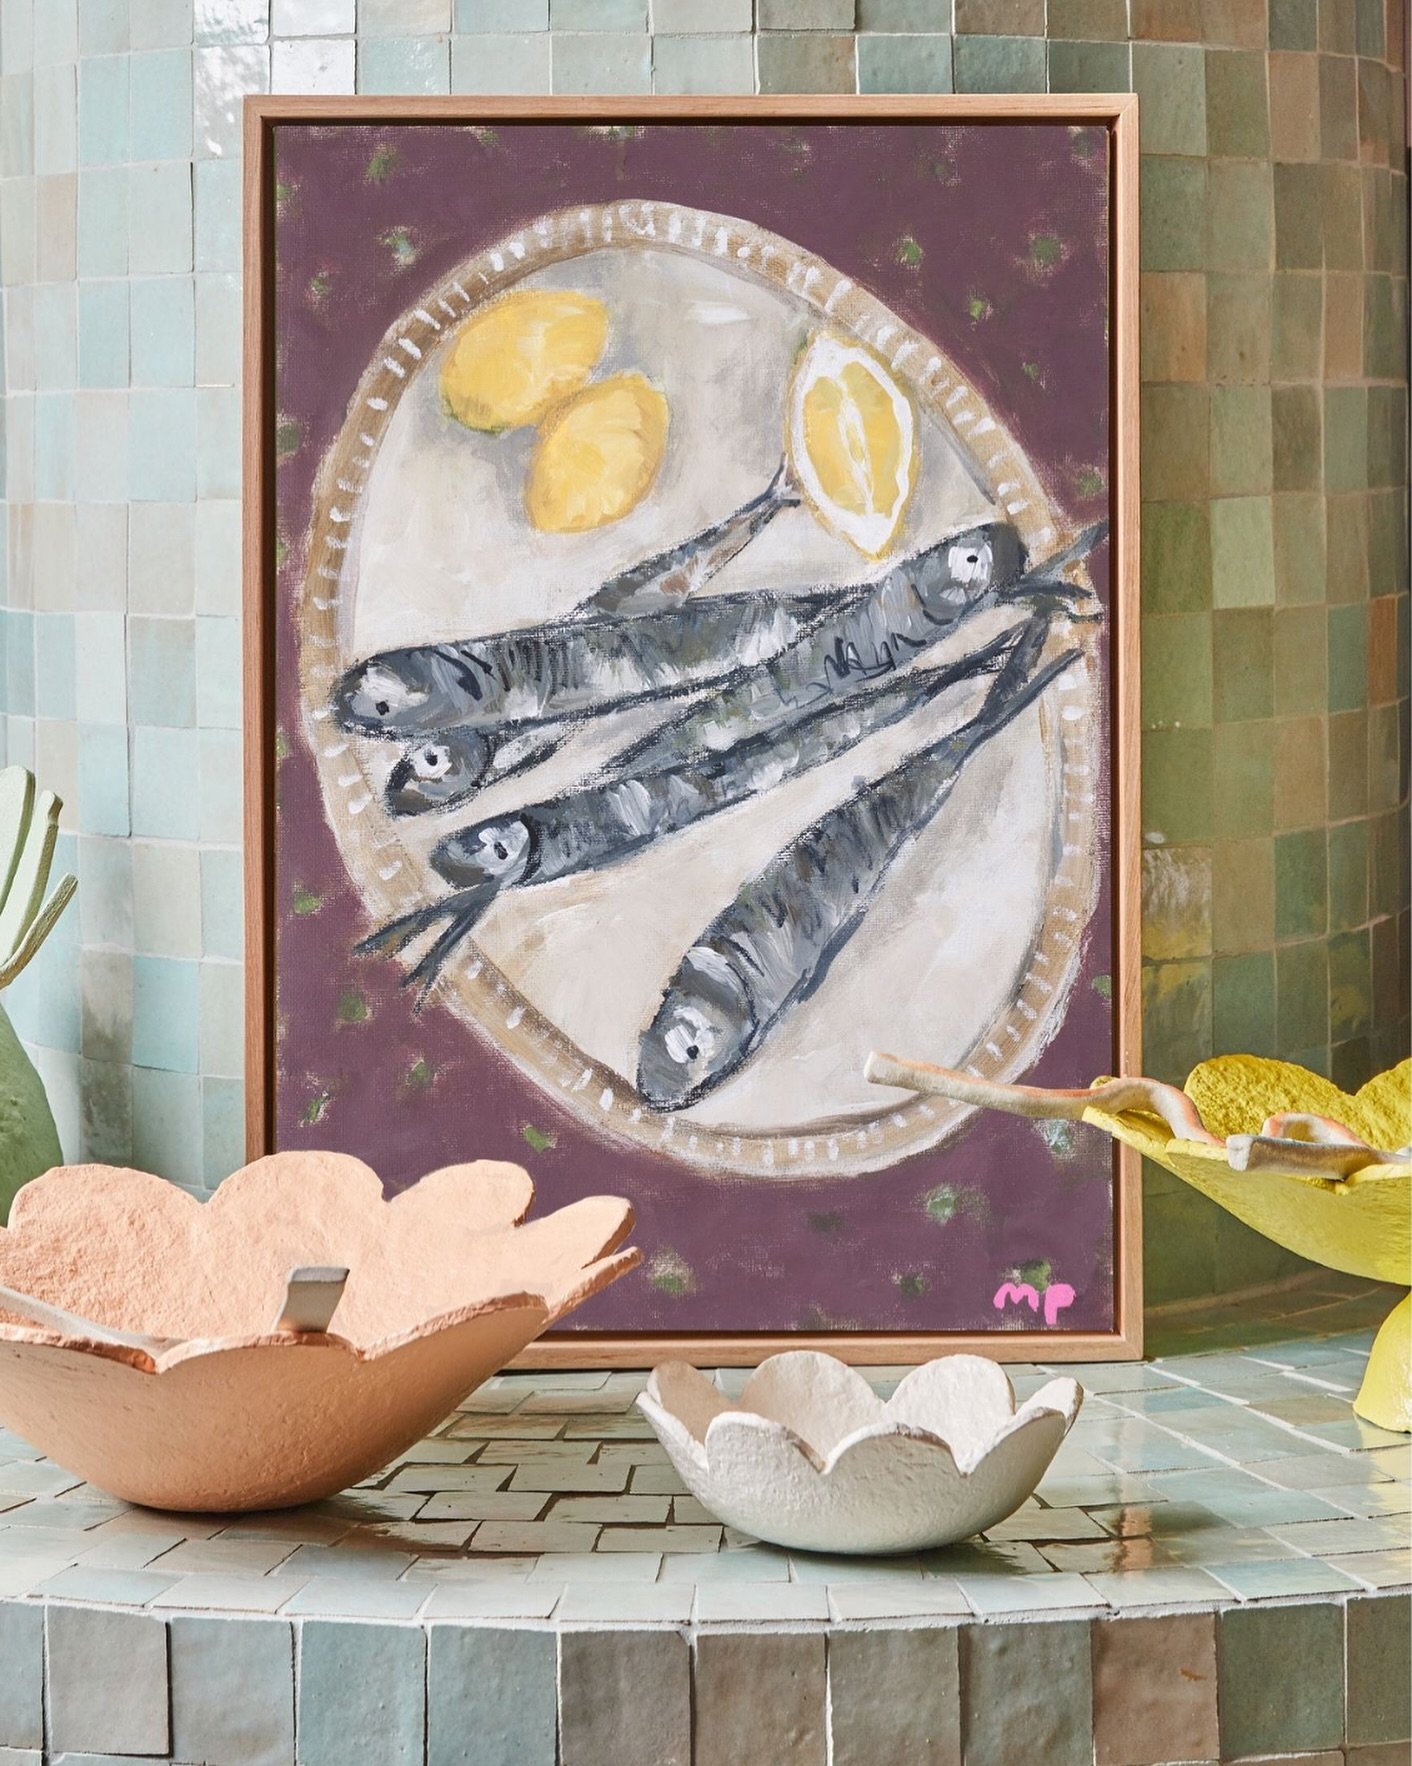 Pilchard Plate 🎣 
Available now online @greenhouseinteriors ✨

#art #artgallery #artcollector #artoftheday #interiors #interiorstyling #kitchendecor #kitchendesign #sardines #foodie